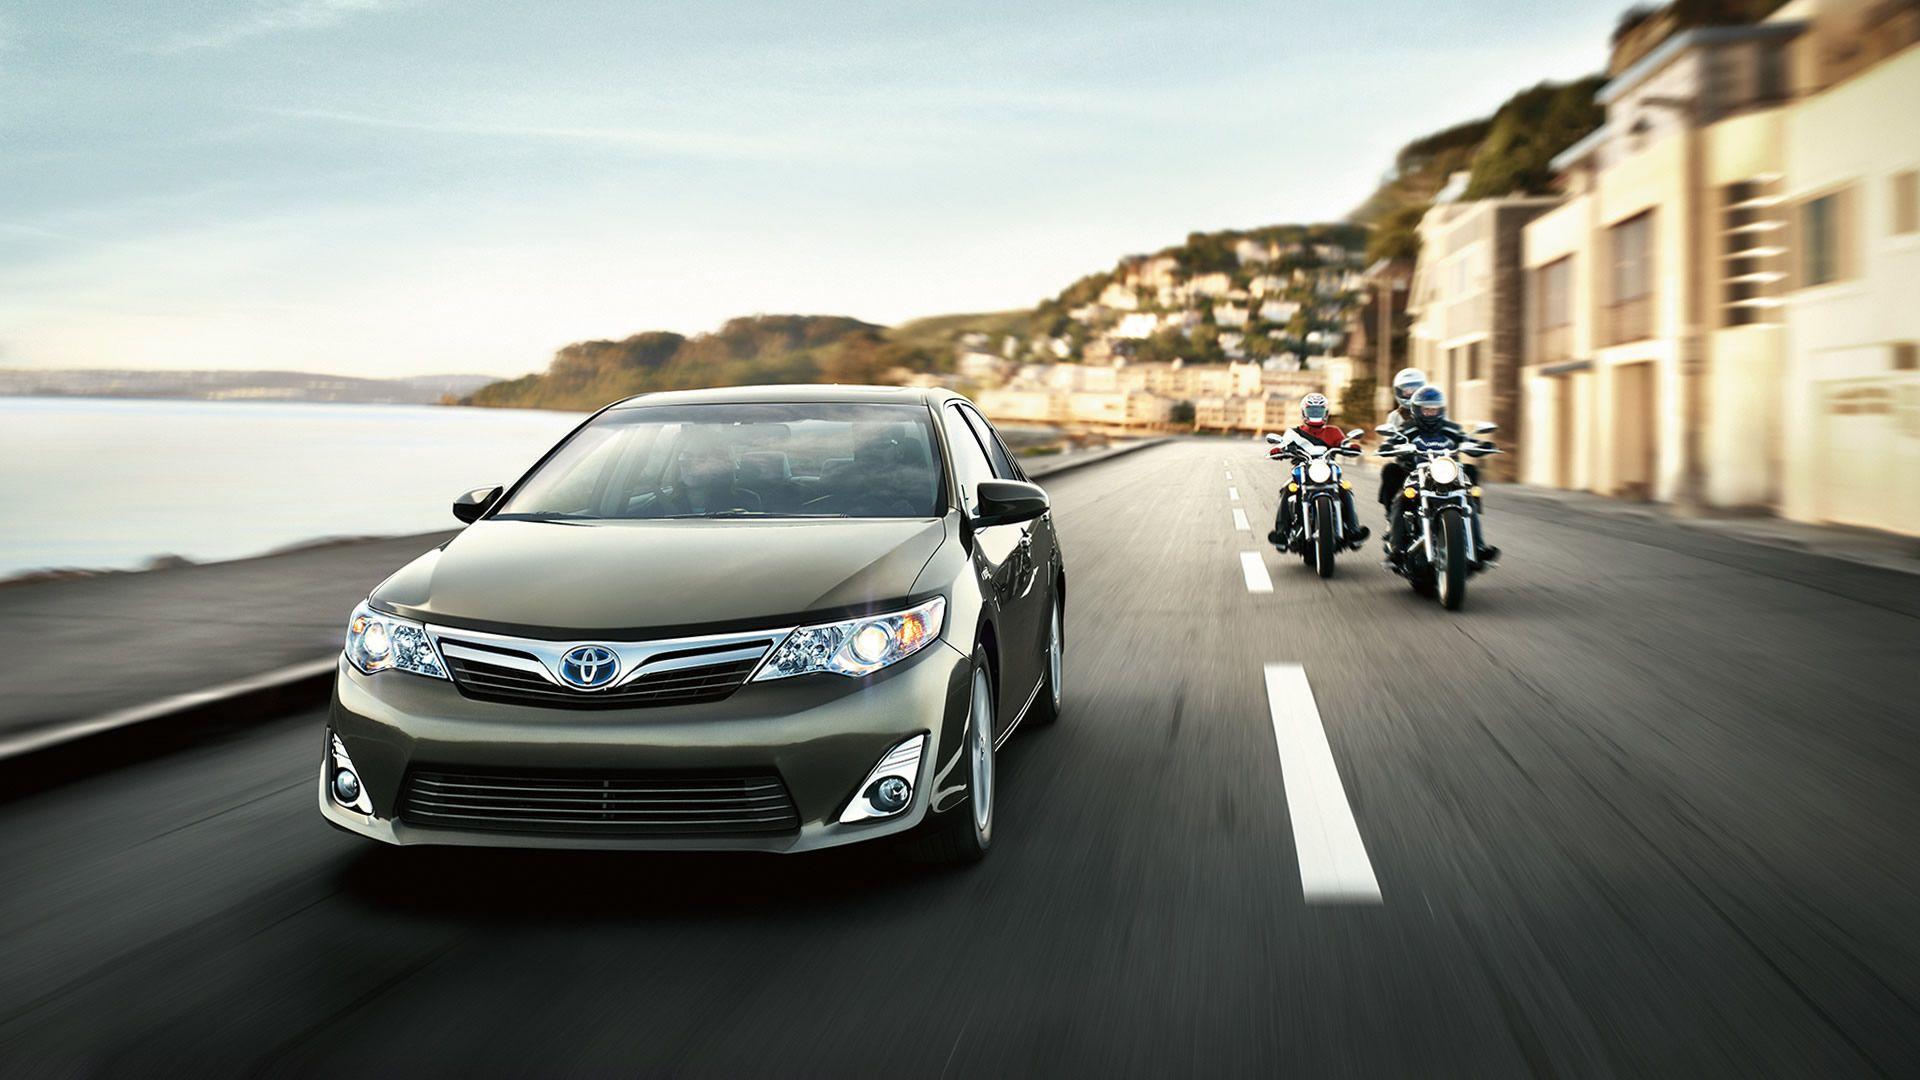 Toyota Camry Wallpaper, Top HD Toyota Camry Wallpaper, #CT HD Quality